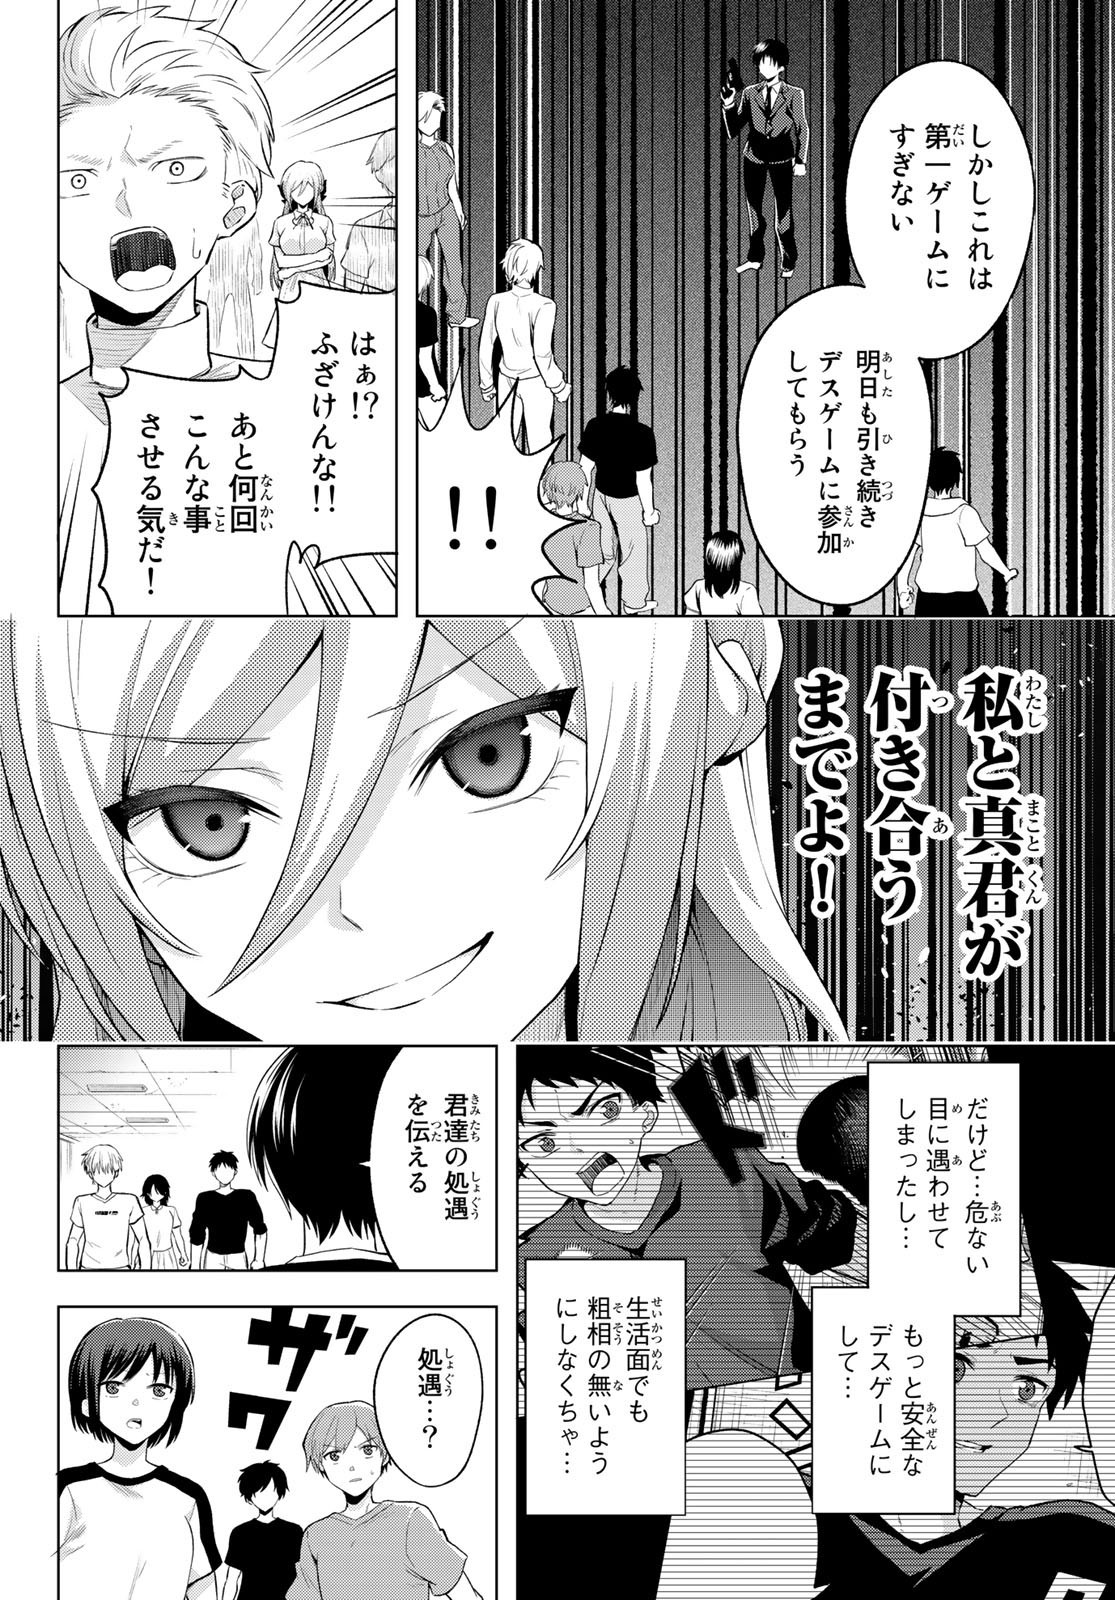 Weekly Shōnen Magazine - 週刊少年マガジン - Chapter 2022-32 - Page 672